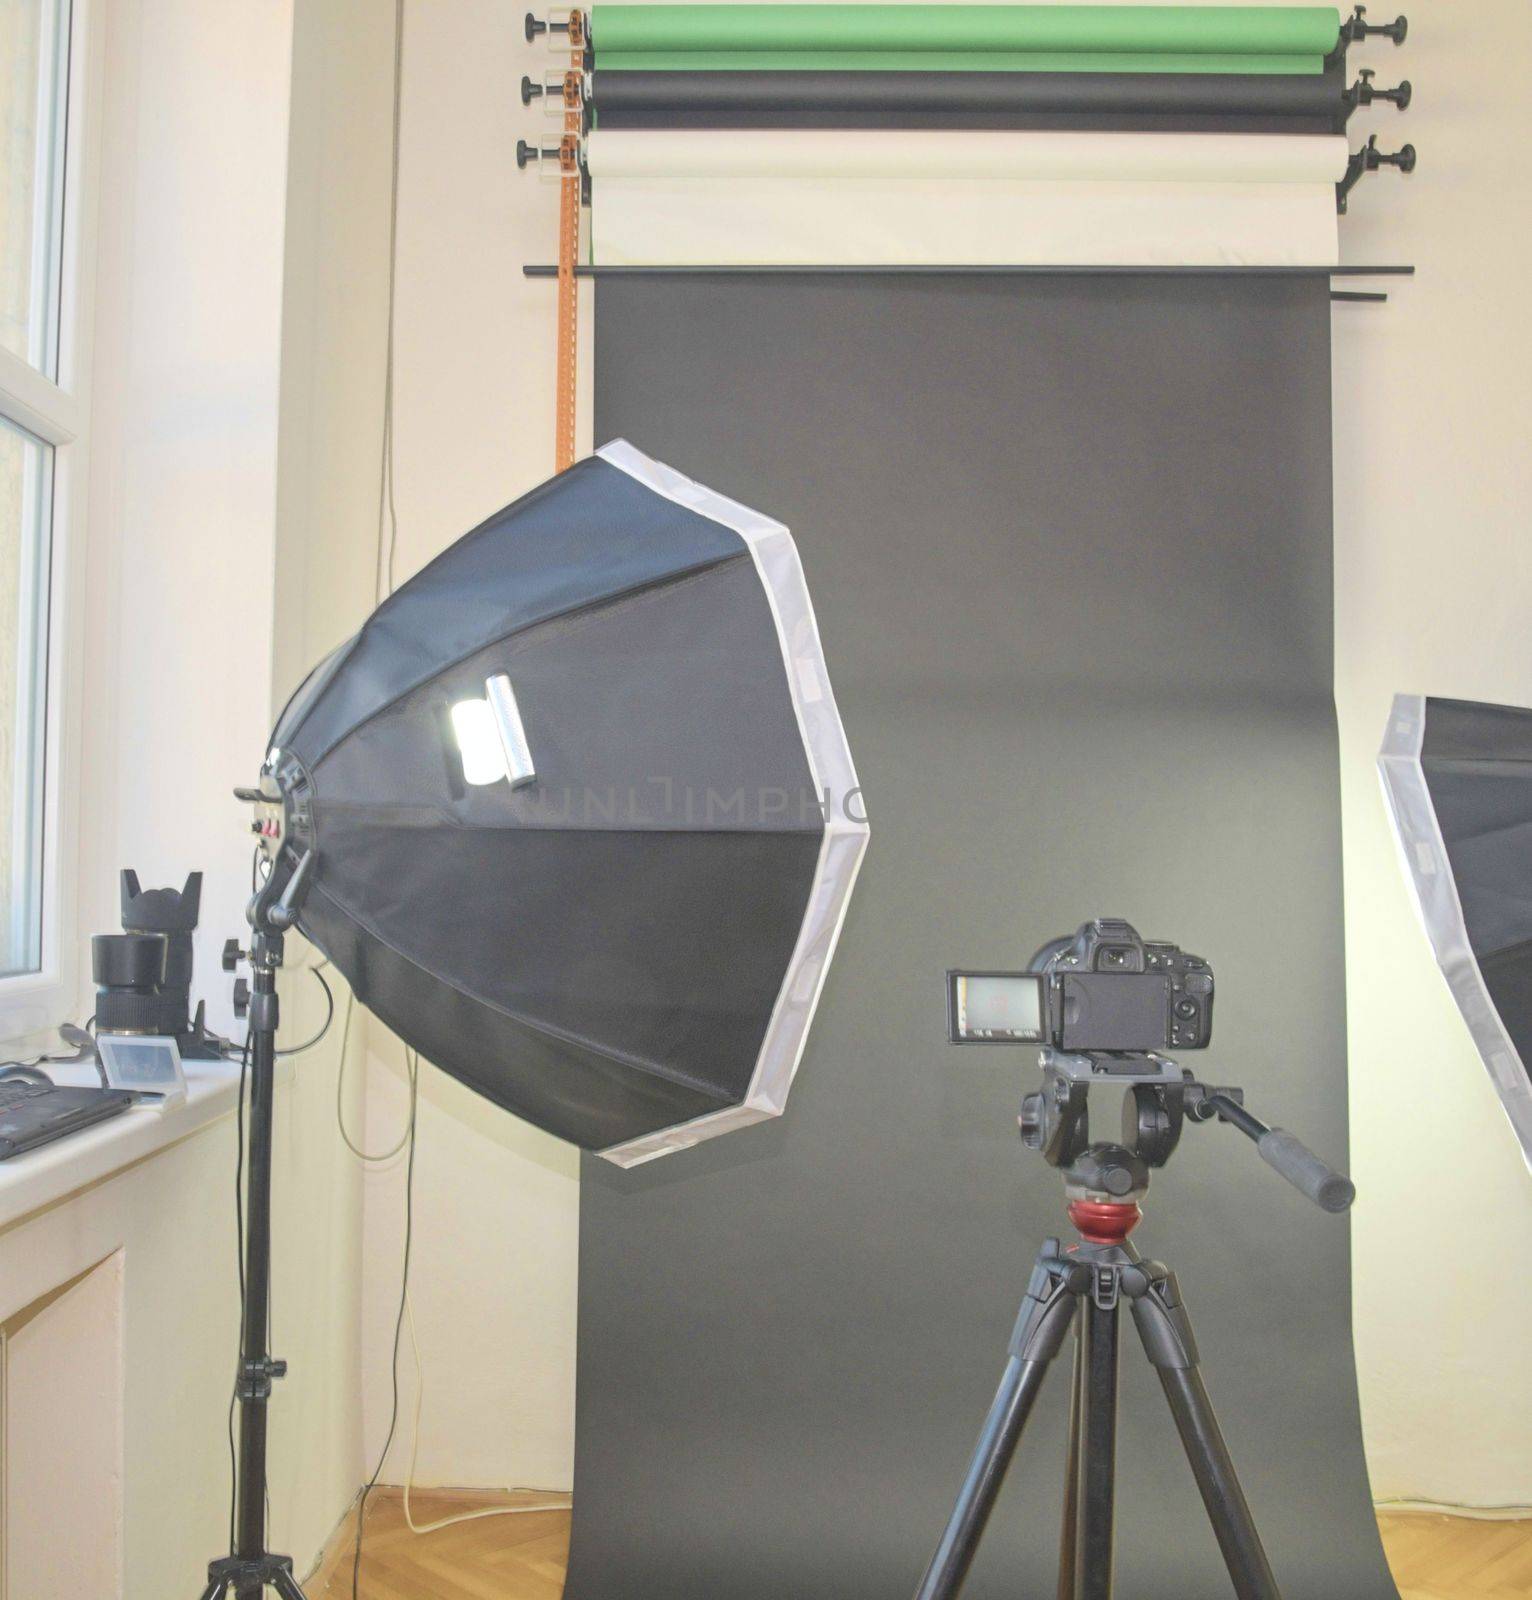 Empty photo studio with lighting equipment. Professional camera, lenses and filters for photographer.